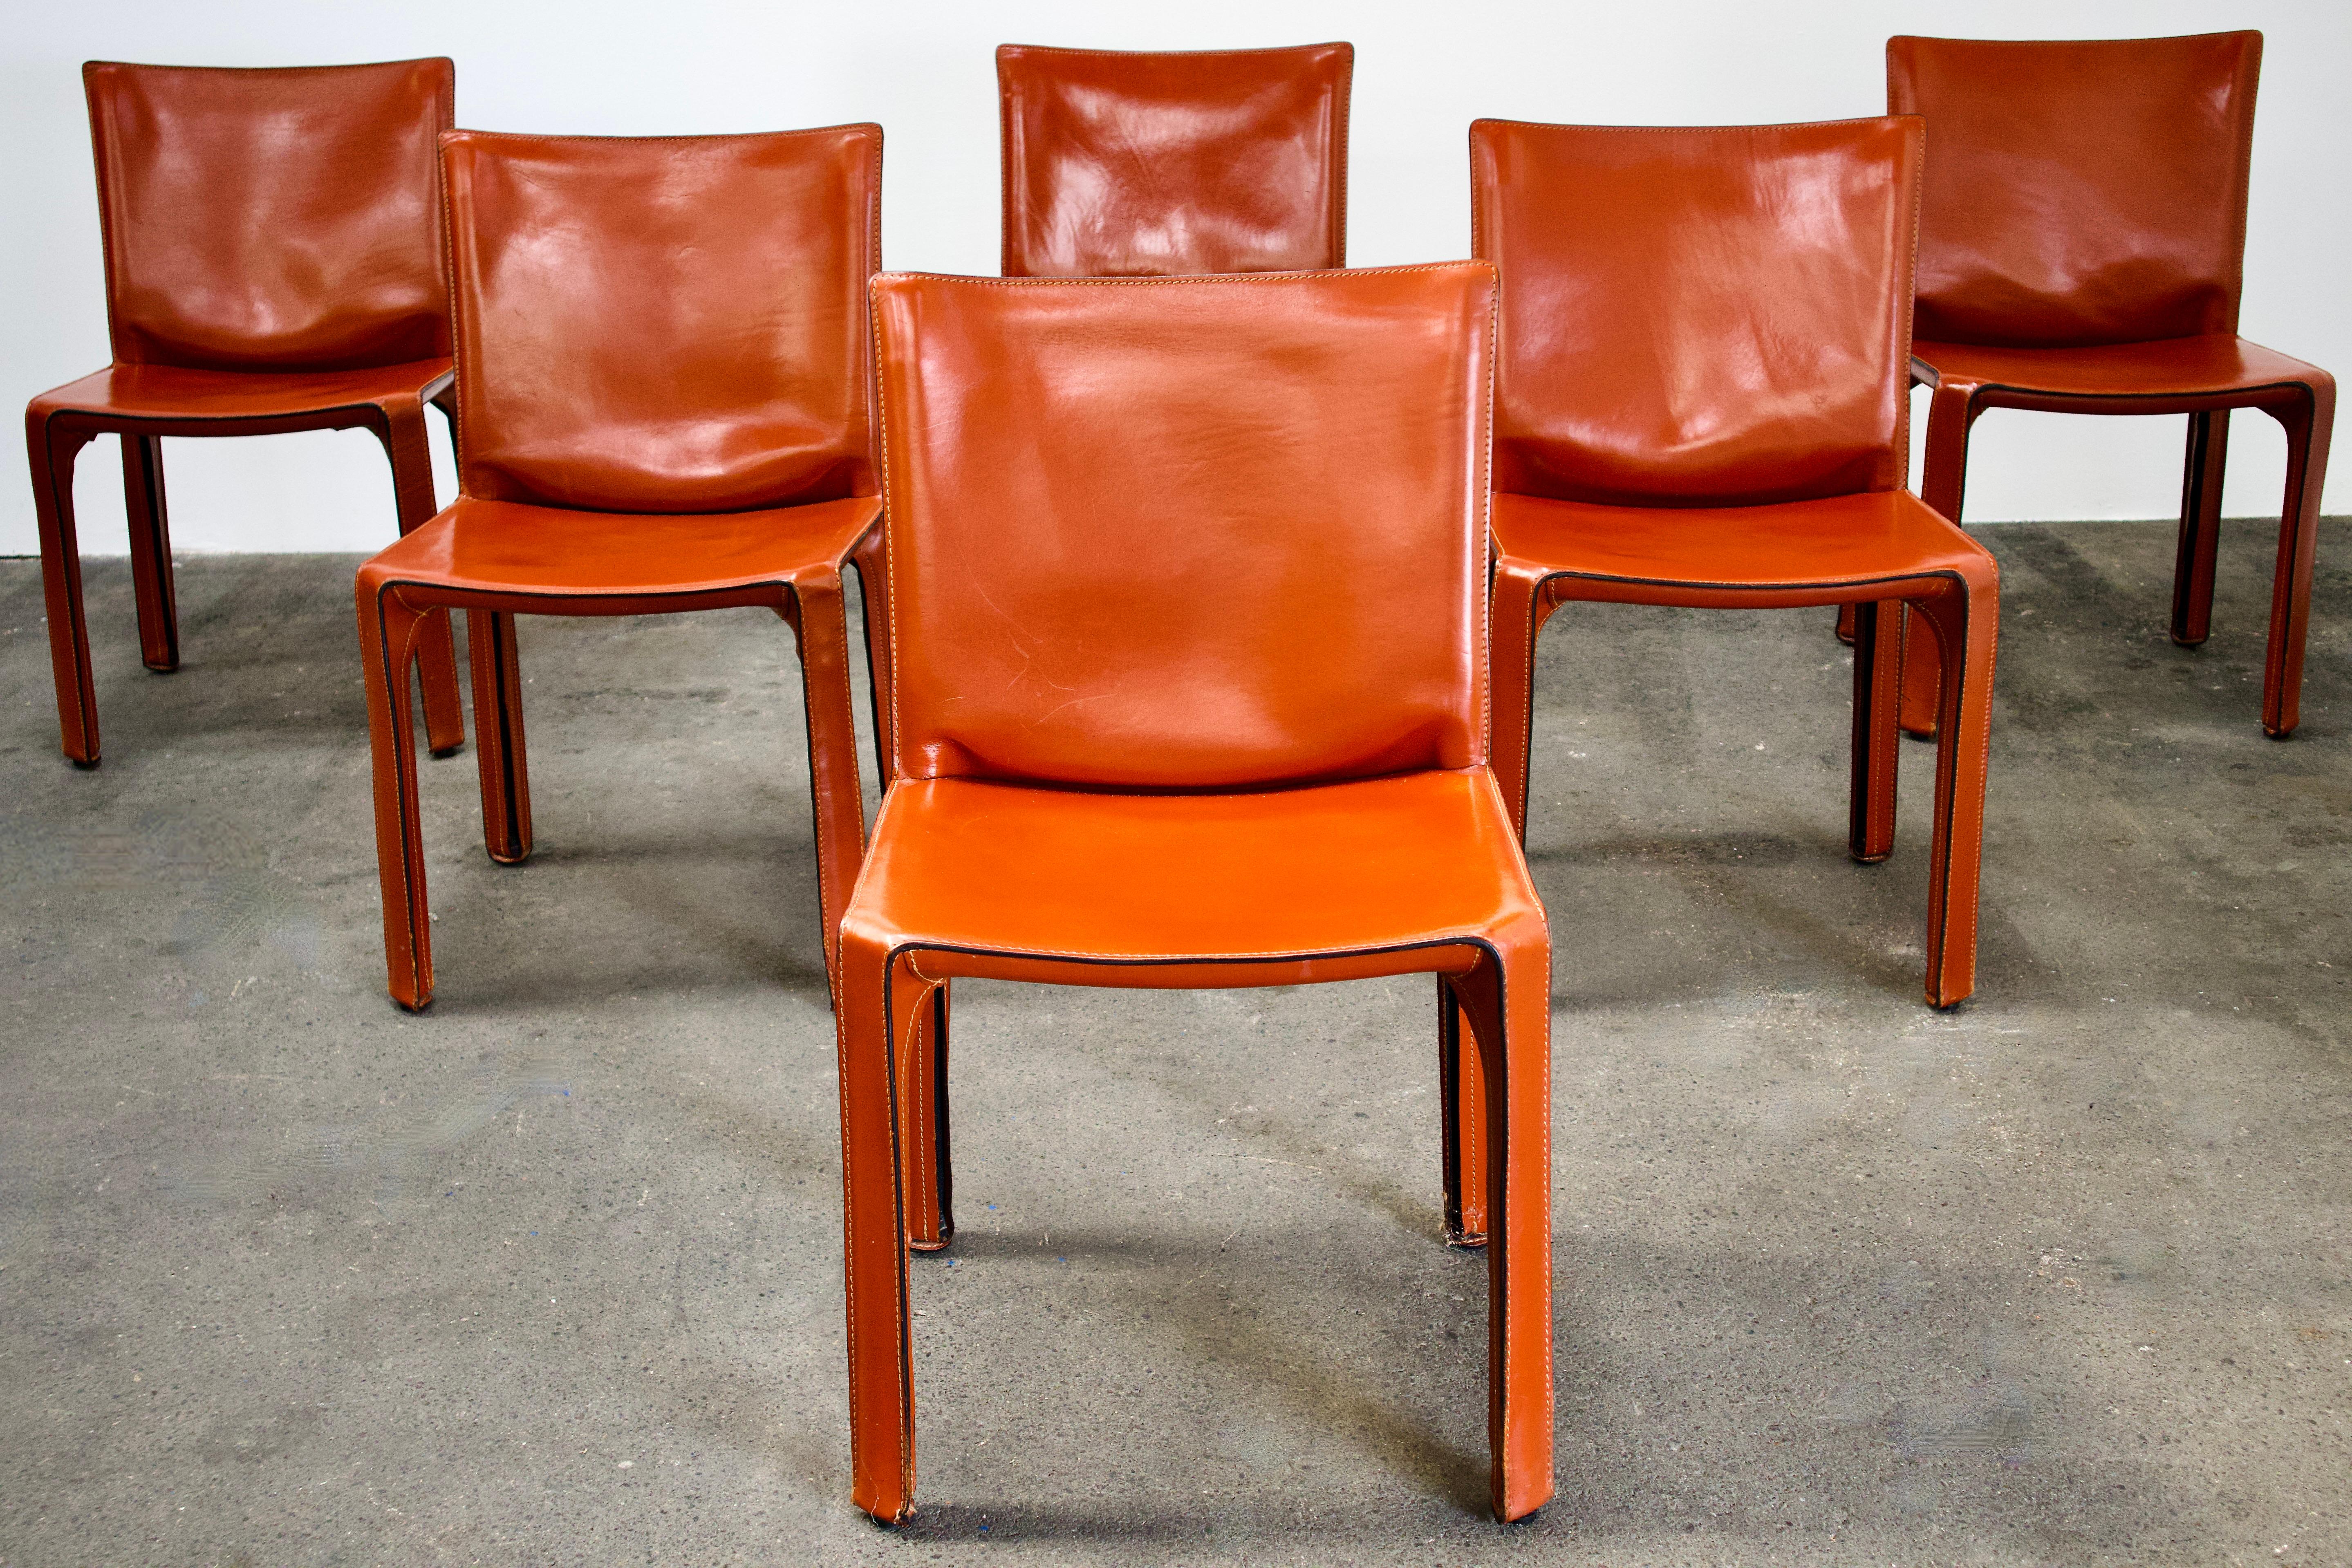 Set of 6 Mario Bellini CAB 412 chairs, made by Cassina in the 1980s. Flexible steel frame covered with a skin of high quality Russian Red (also known as Bulgarian Red) saddle leather. This elegant, versatile chair is equally suitable for the dining